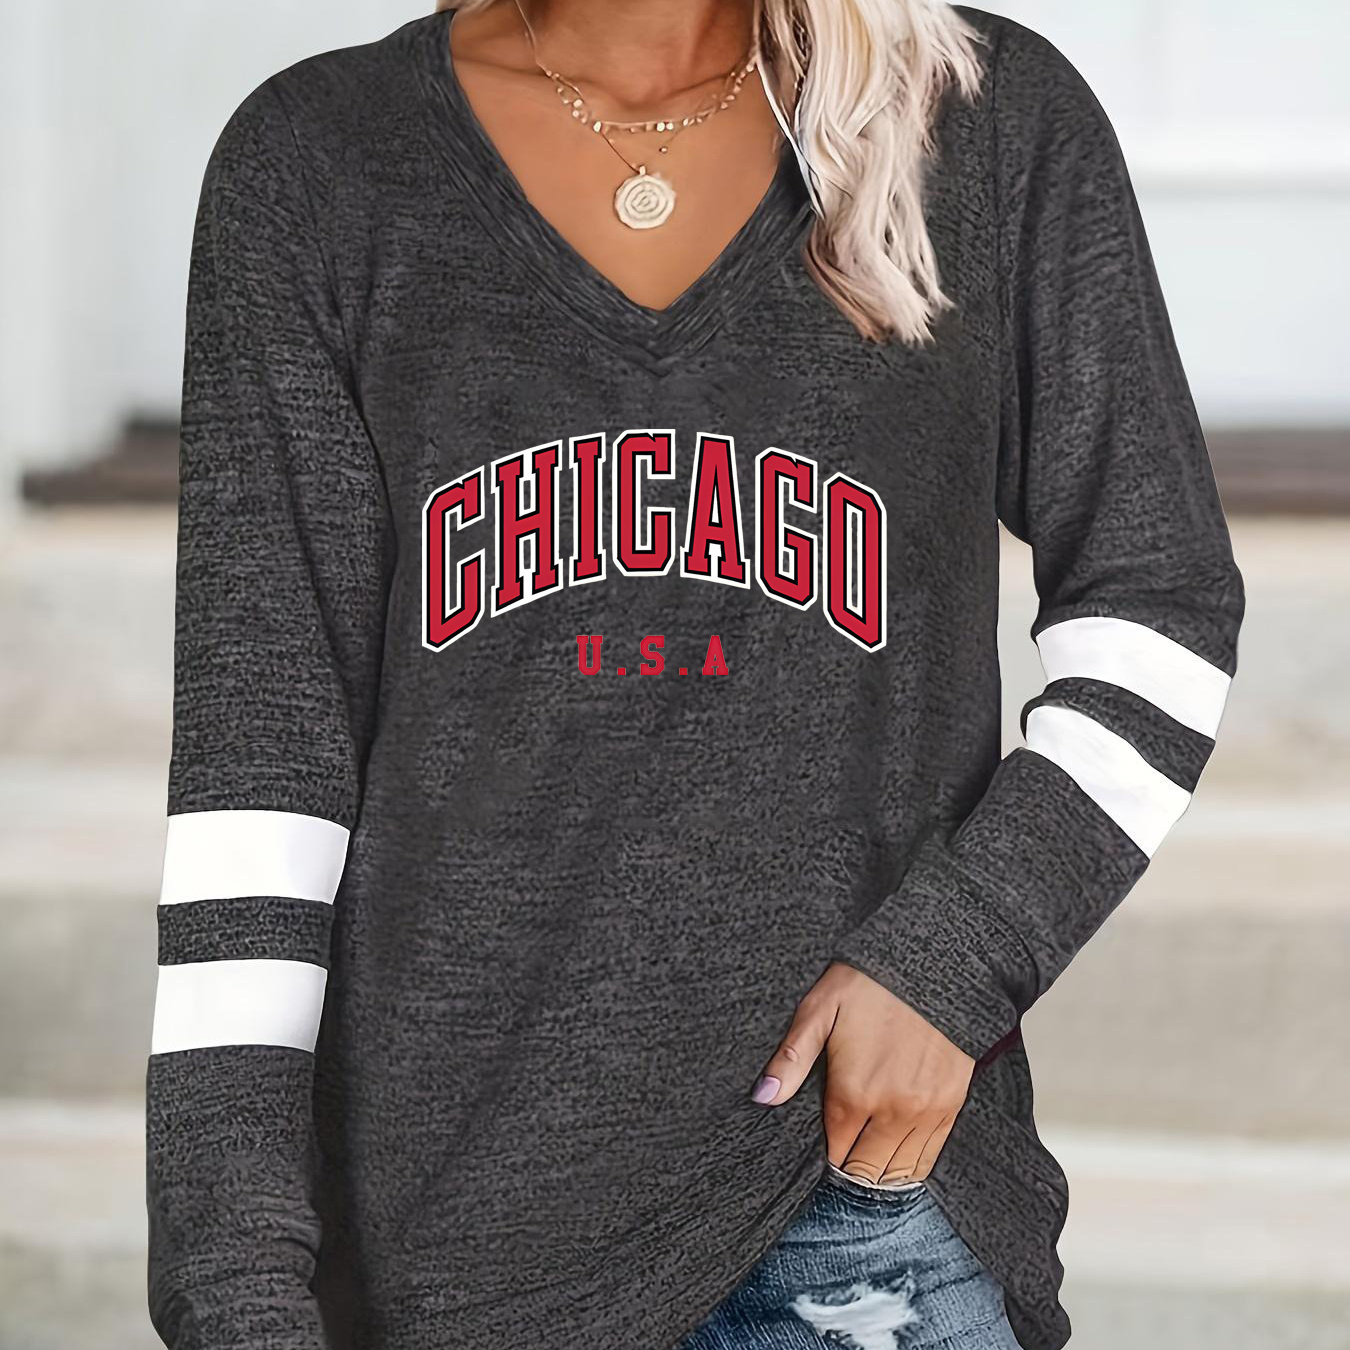 

Chicago Letter Print T-shirt, Long Sleeve V Neck Casual Top For Spring & Fall, Women's Clothing